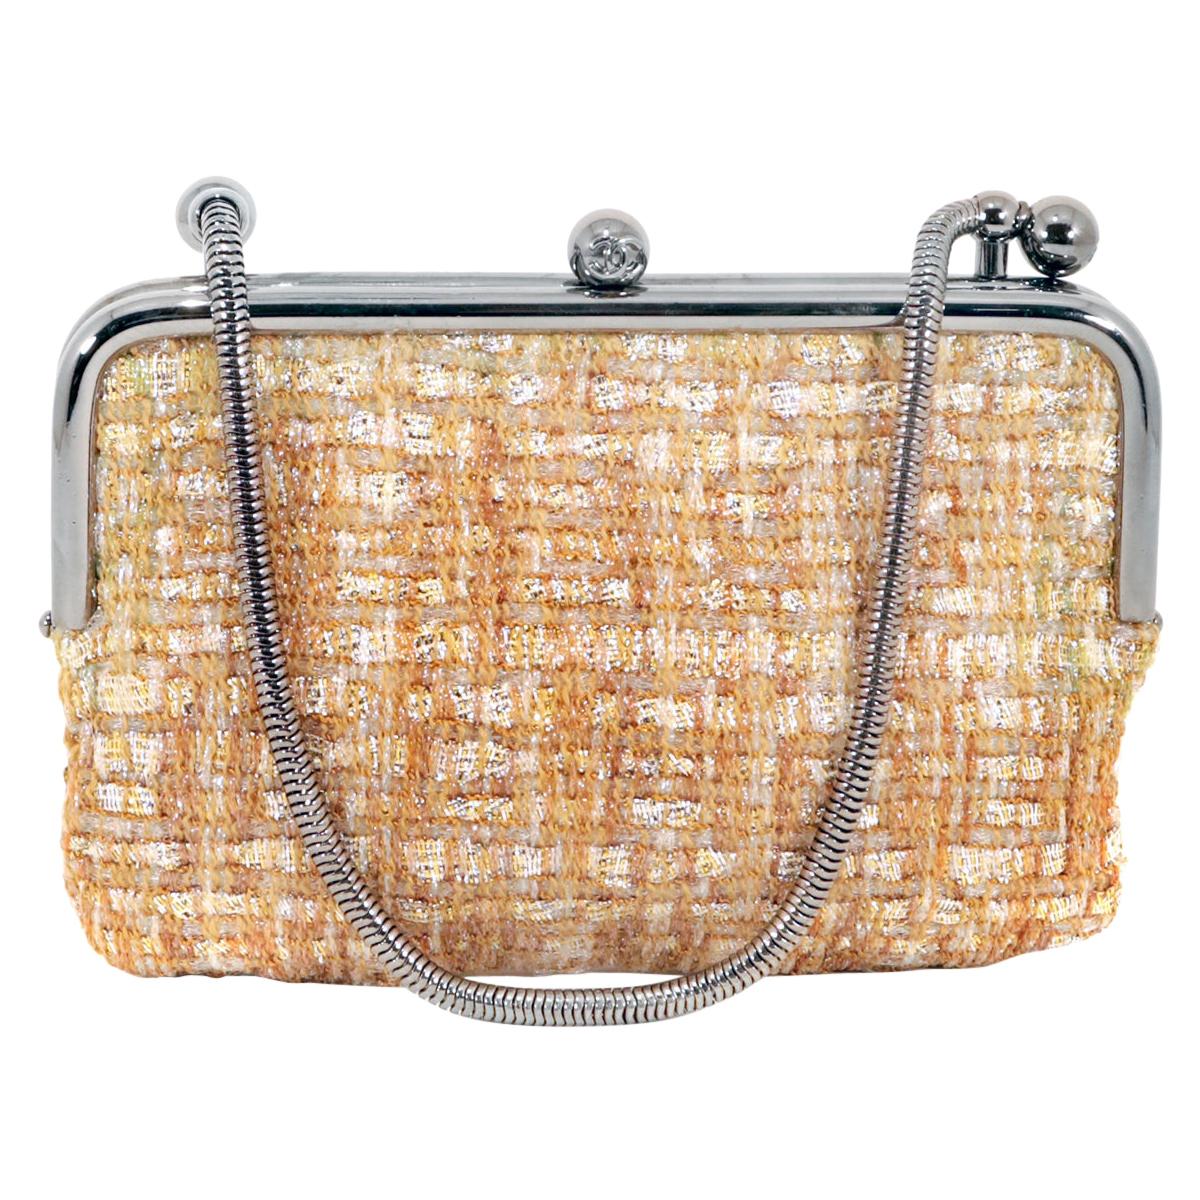 Chanel Gold Tweed Couture Collection Kiss Lock Mini Bag For Sale